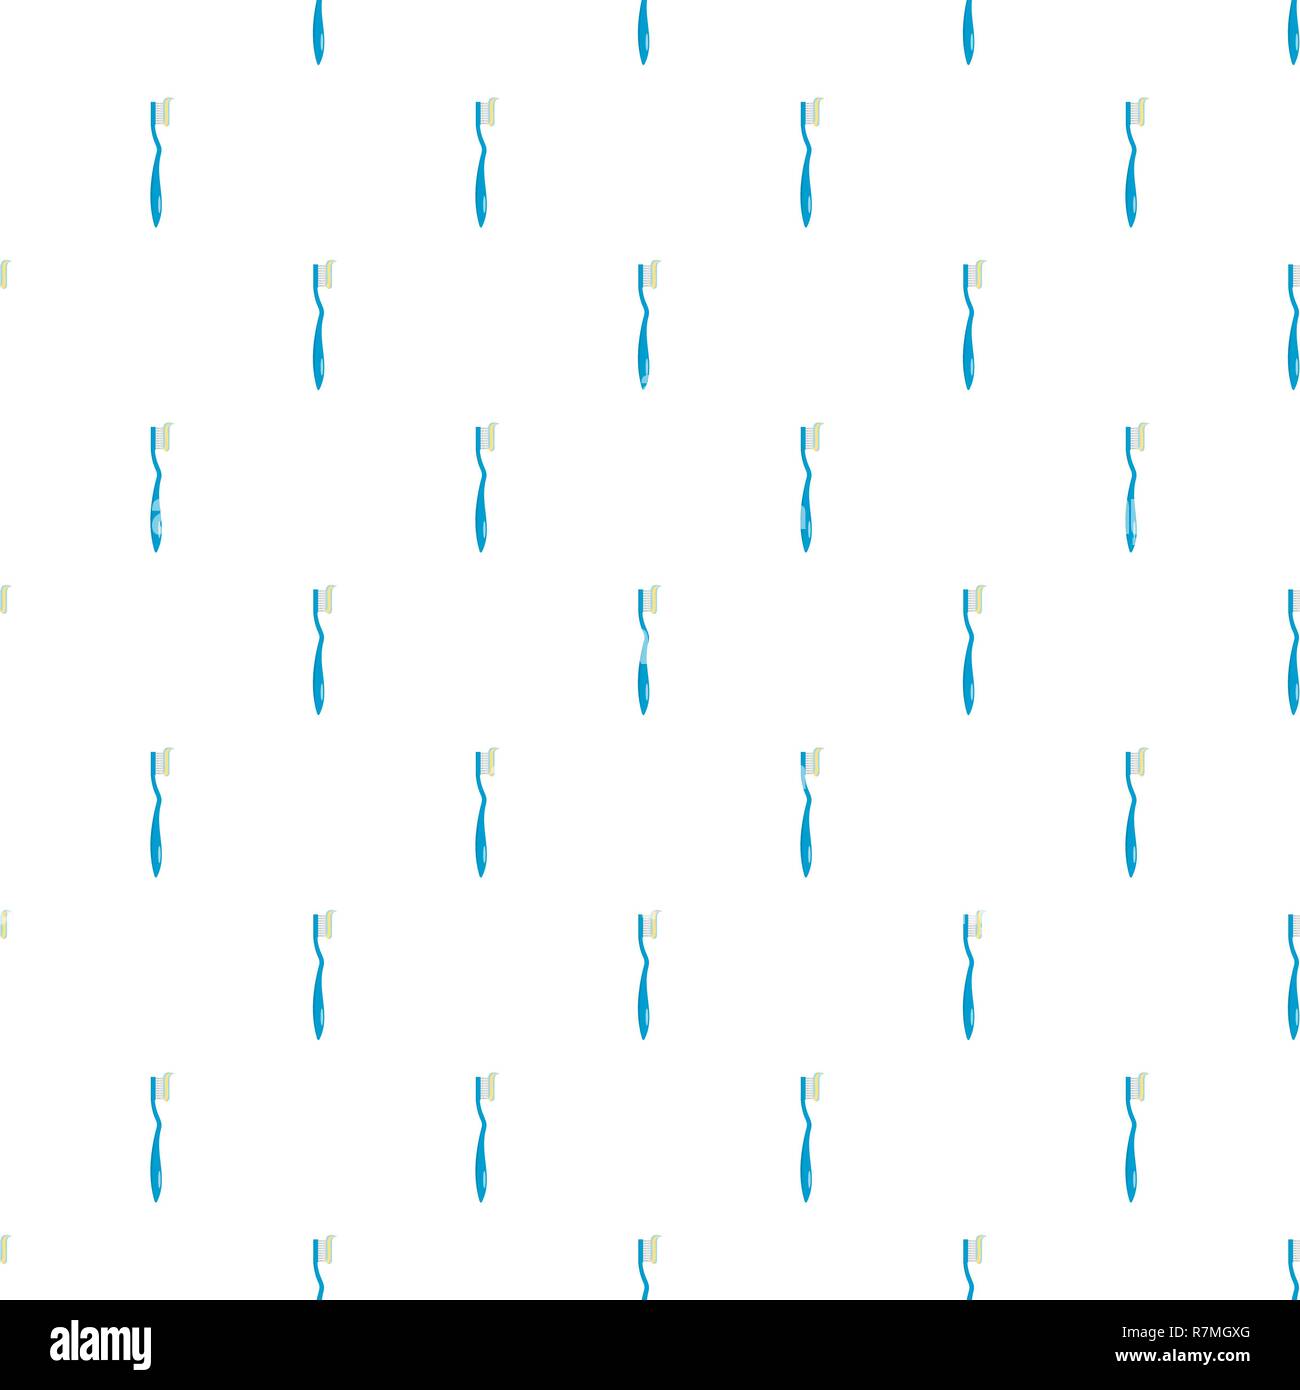 Toothbrush pattern seamless vector repeat for any web design Stock Vector